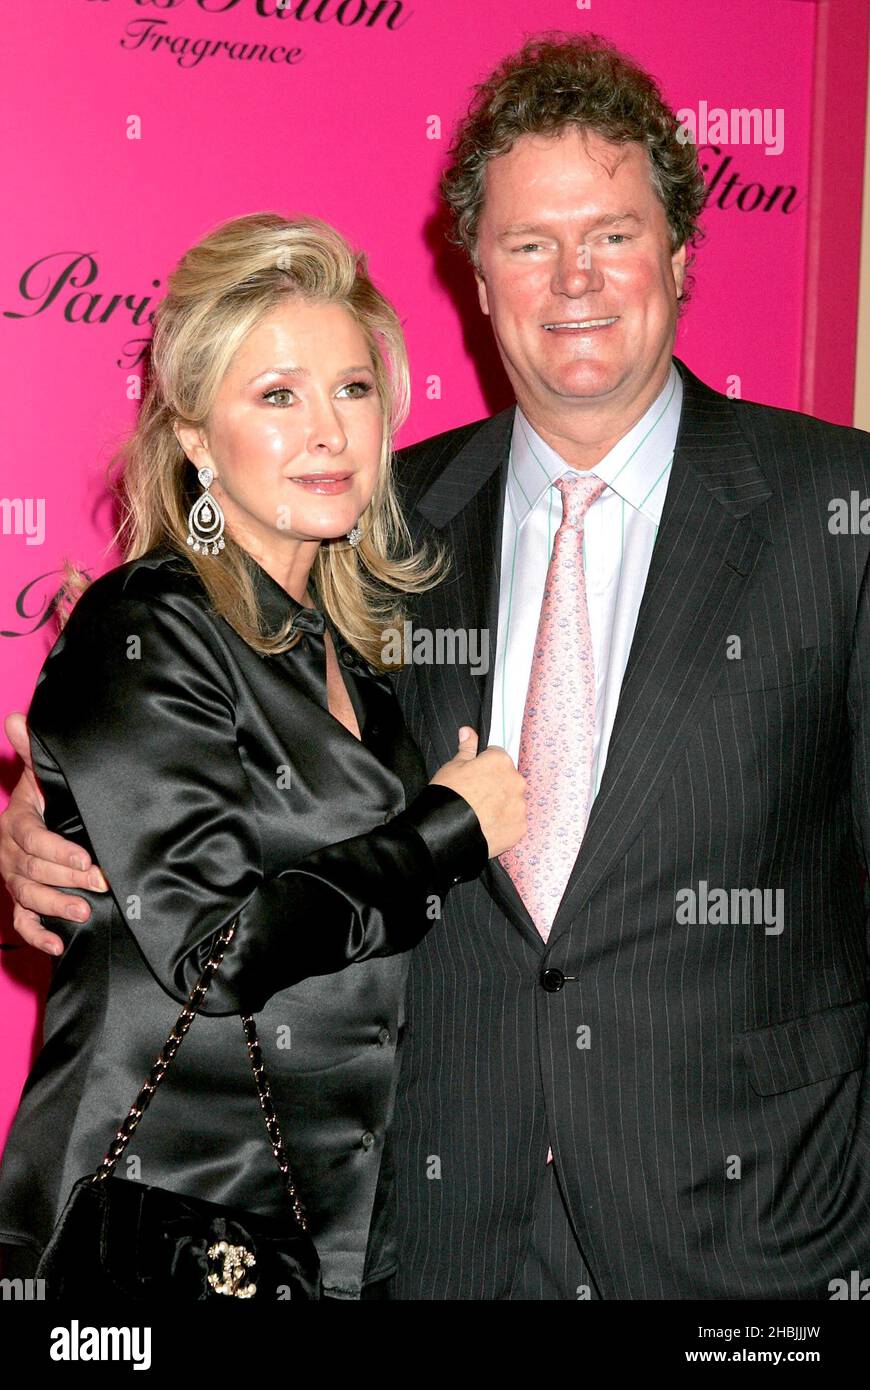 Paris Hilton's parents Rick Hilton and Kathy Richards at her Fragrance Launch Party, launching her new signature fragrance, at Il Bottaccio, Grosvenor Place on in London. Stock Photo